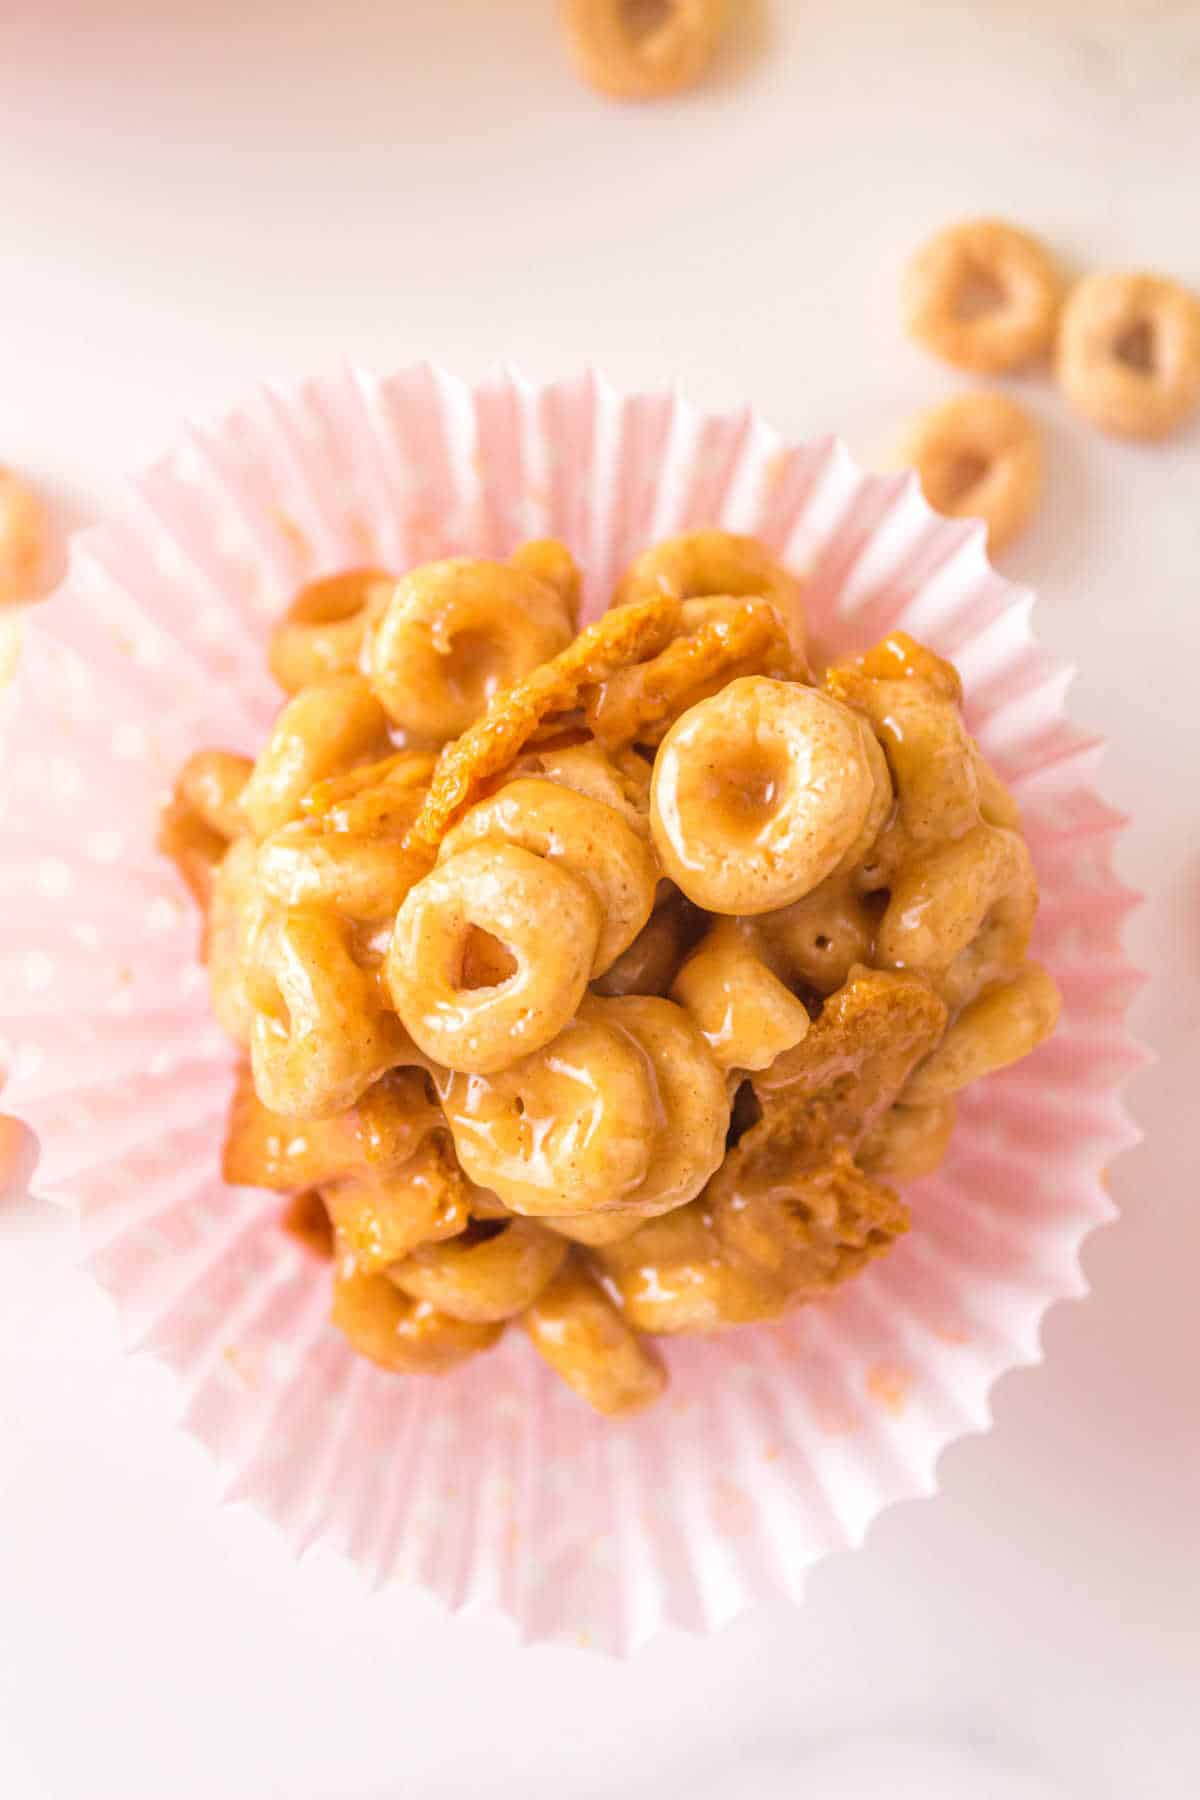 A peanut butter Cheerio balls in a pink cupcake liner.